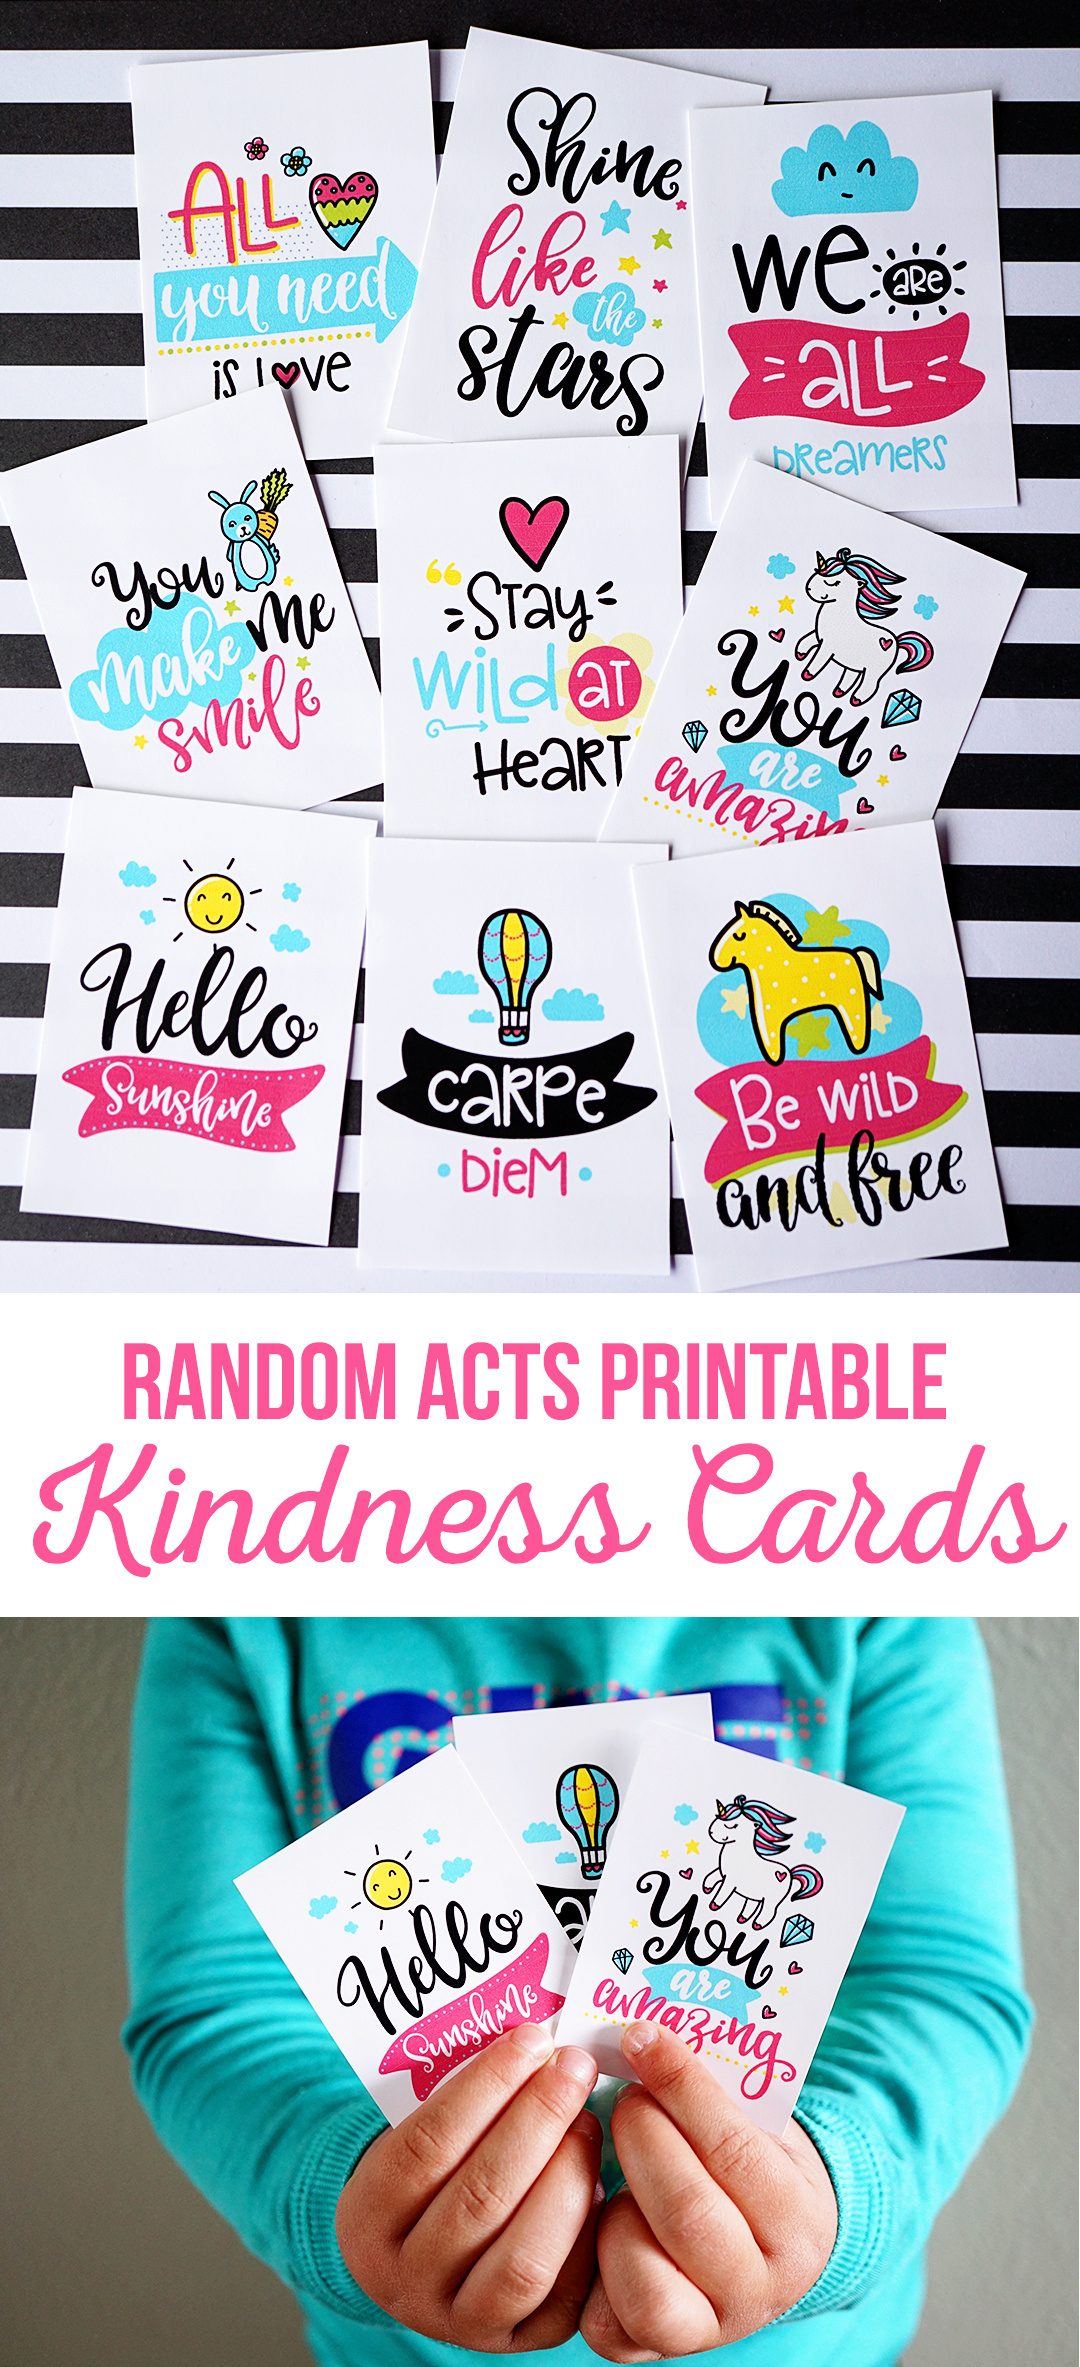 Random Acts Printable Kindness Cards The Crafting Chicks Within Kindness Certificate Template 7 New Ideas Free